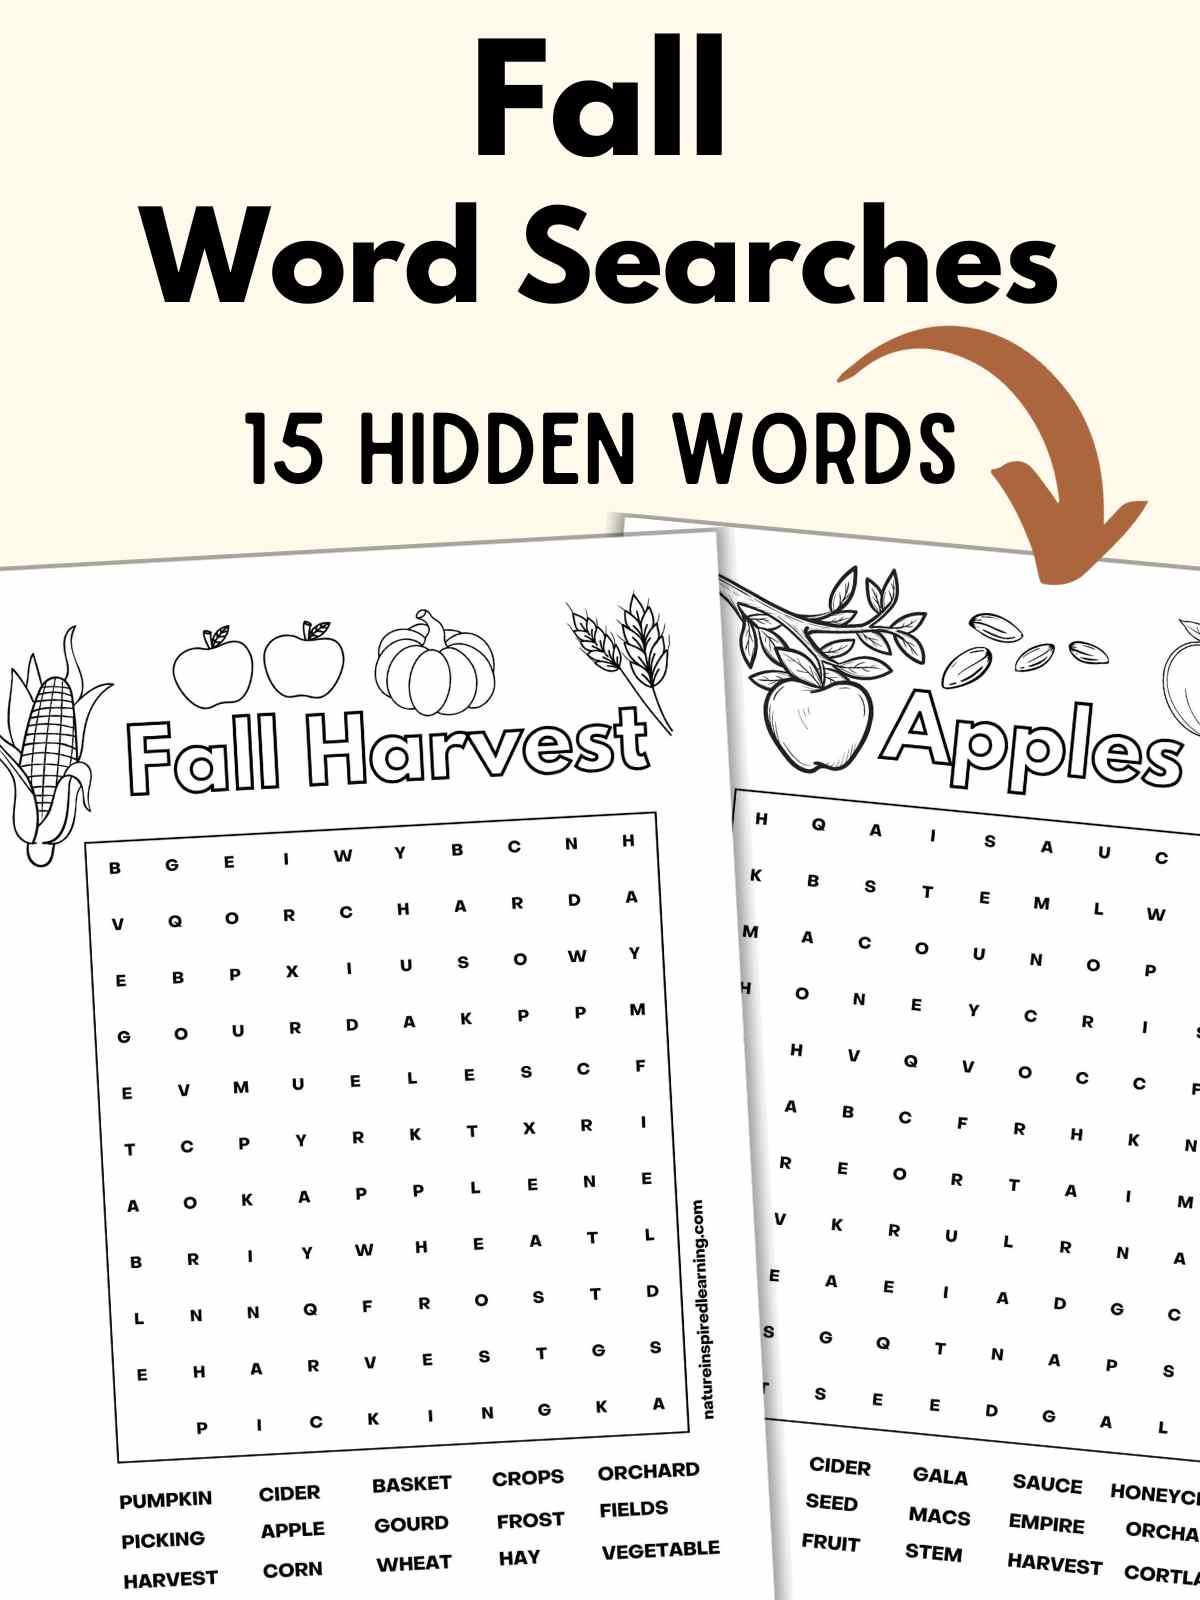 Fall harvest and apples word searches next to each other with black text above on an off white background with a brown arrow pointing down.